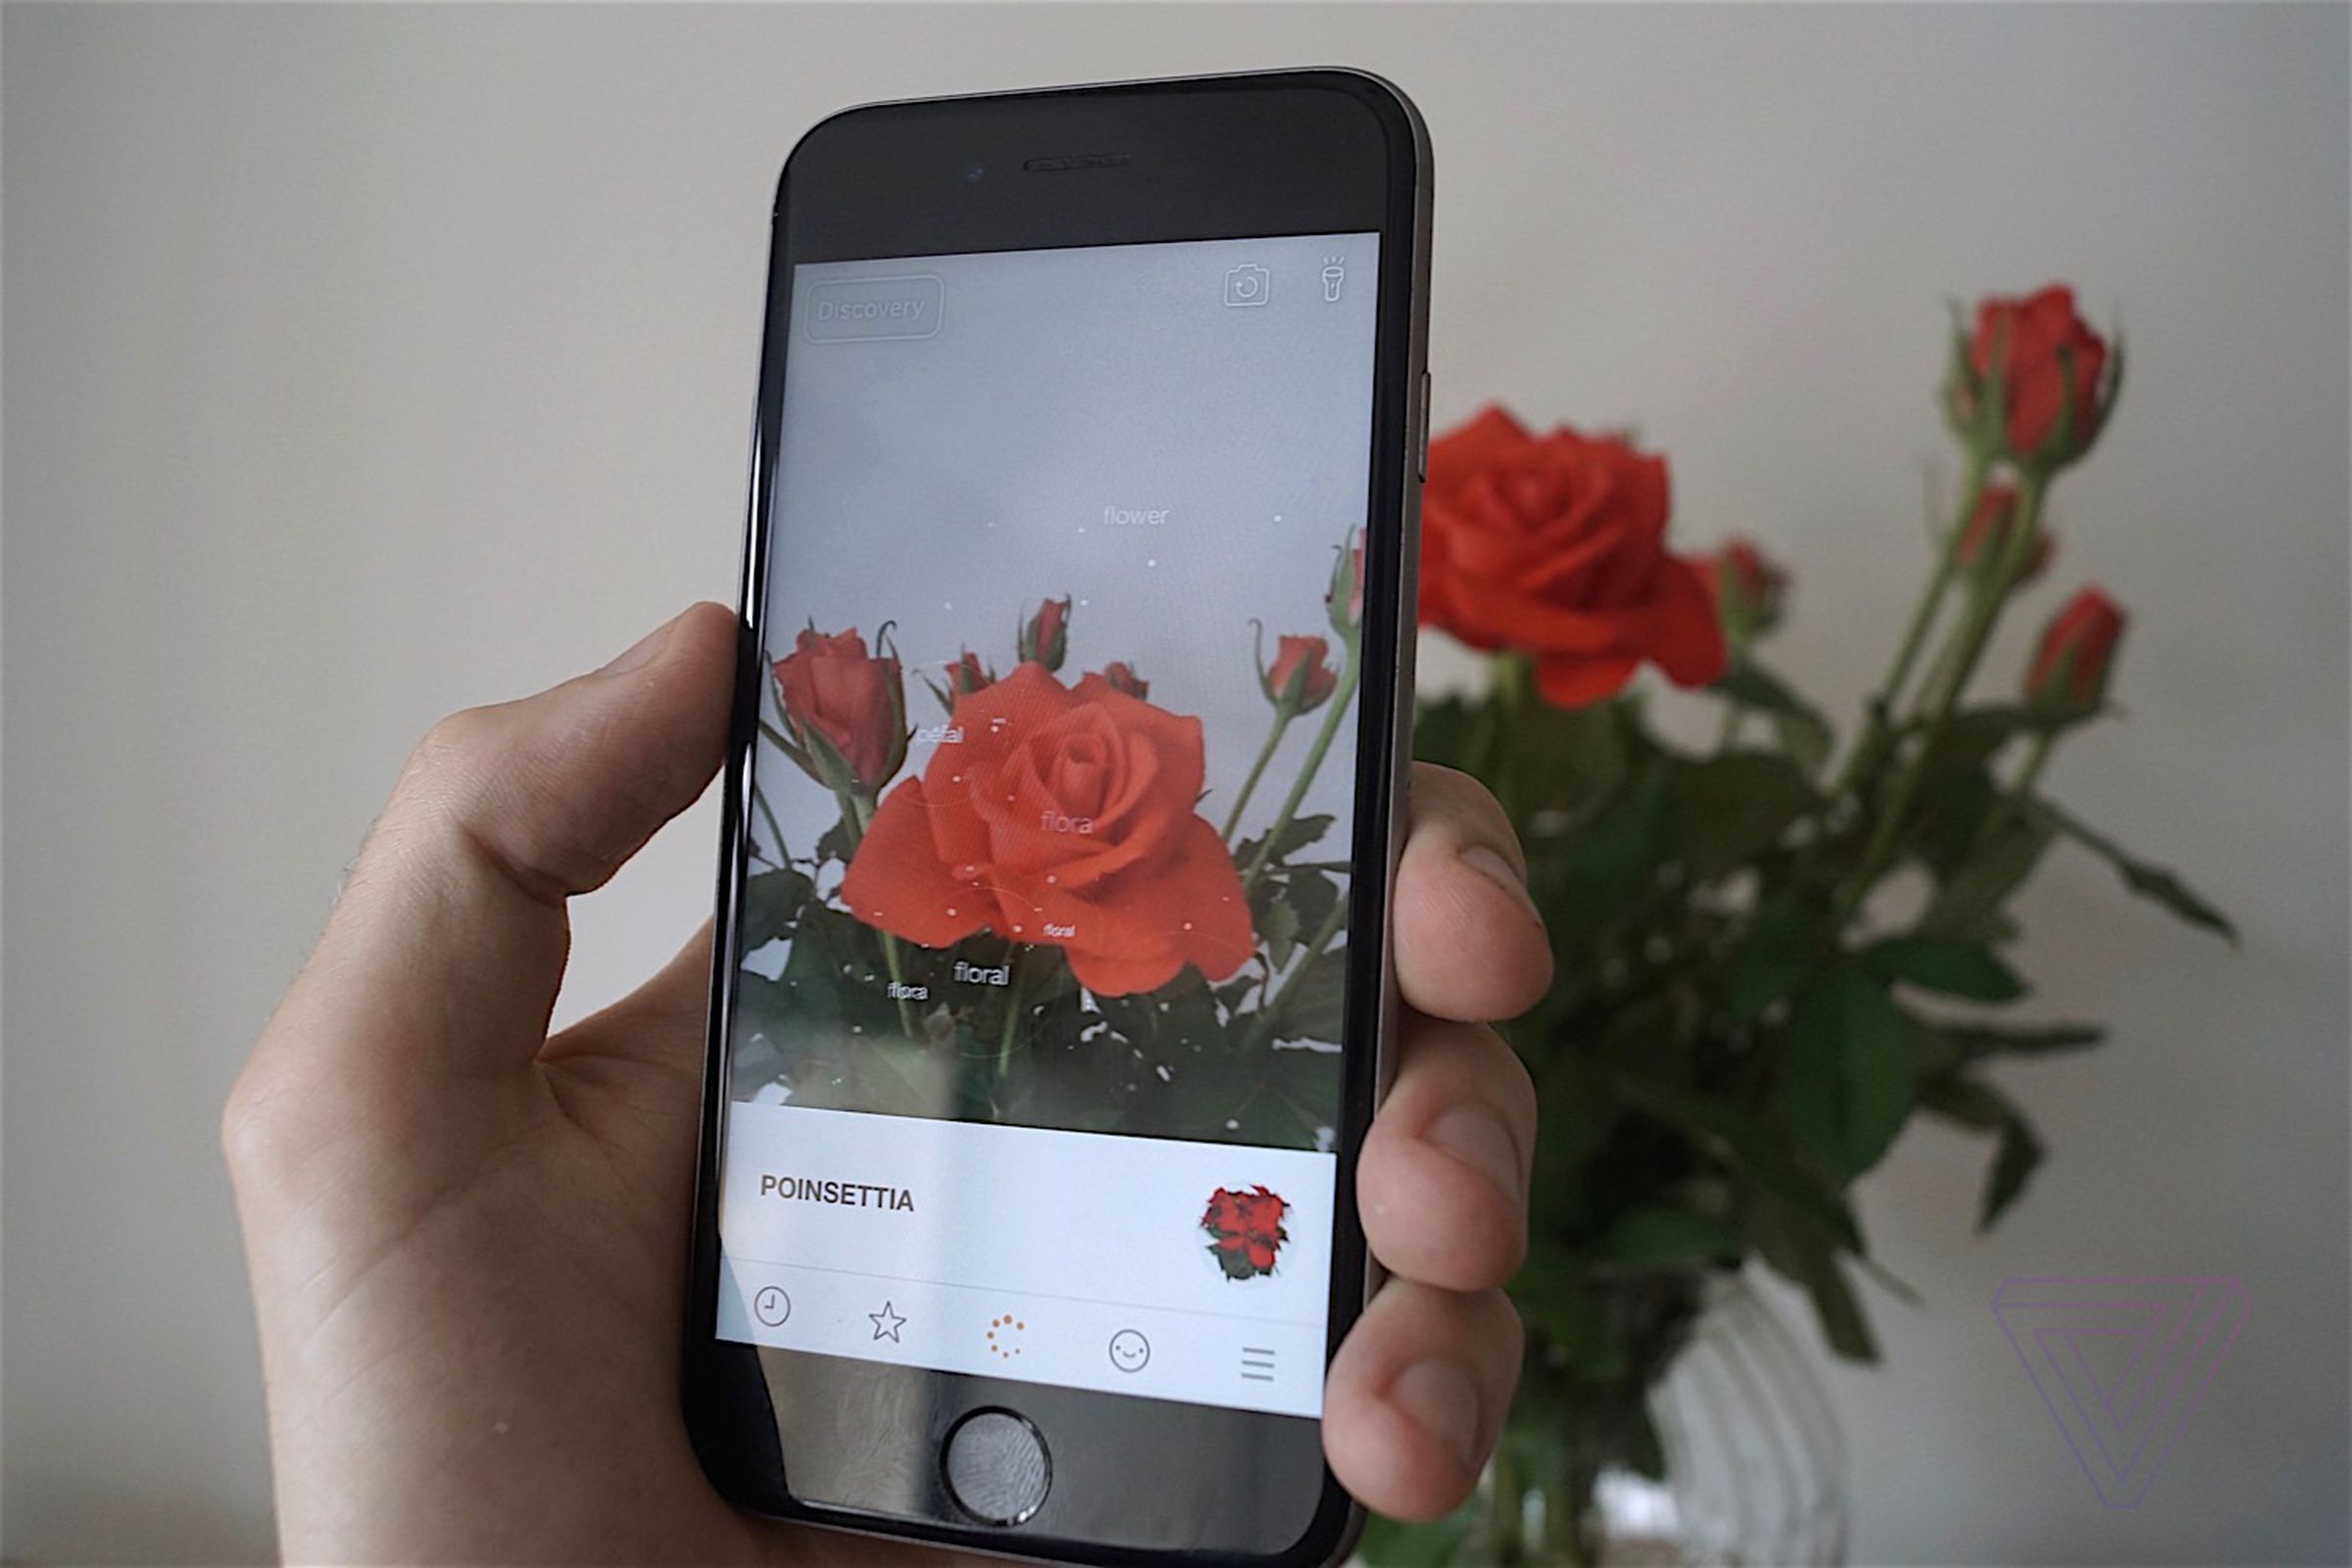 Blippar’s current app is fast but hit and miss. Here it is identifying some roses as poinsettias.